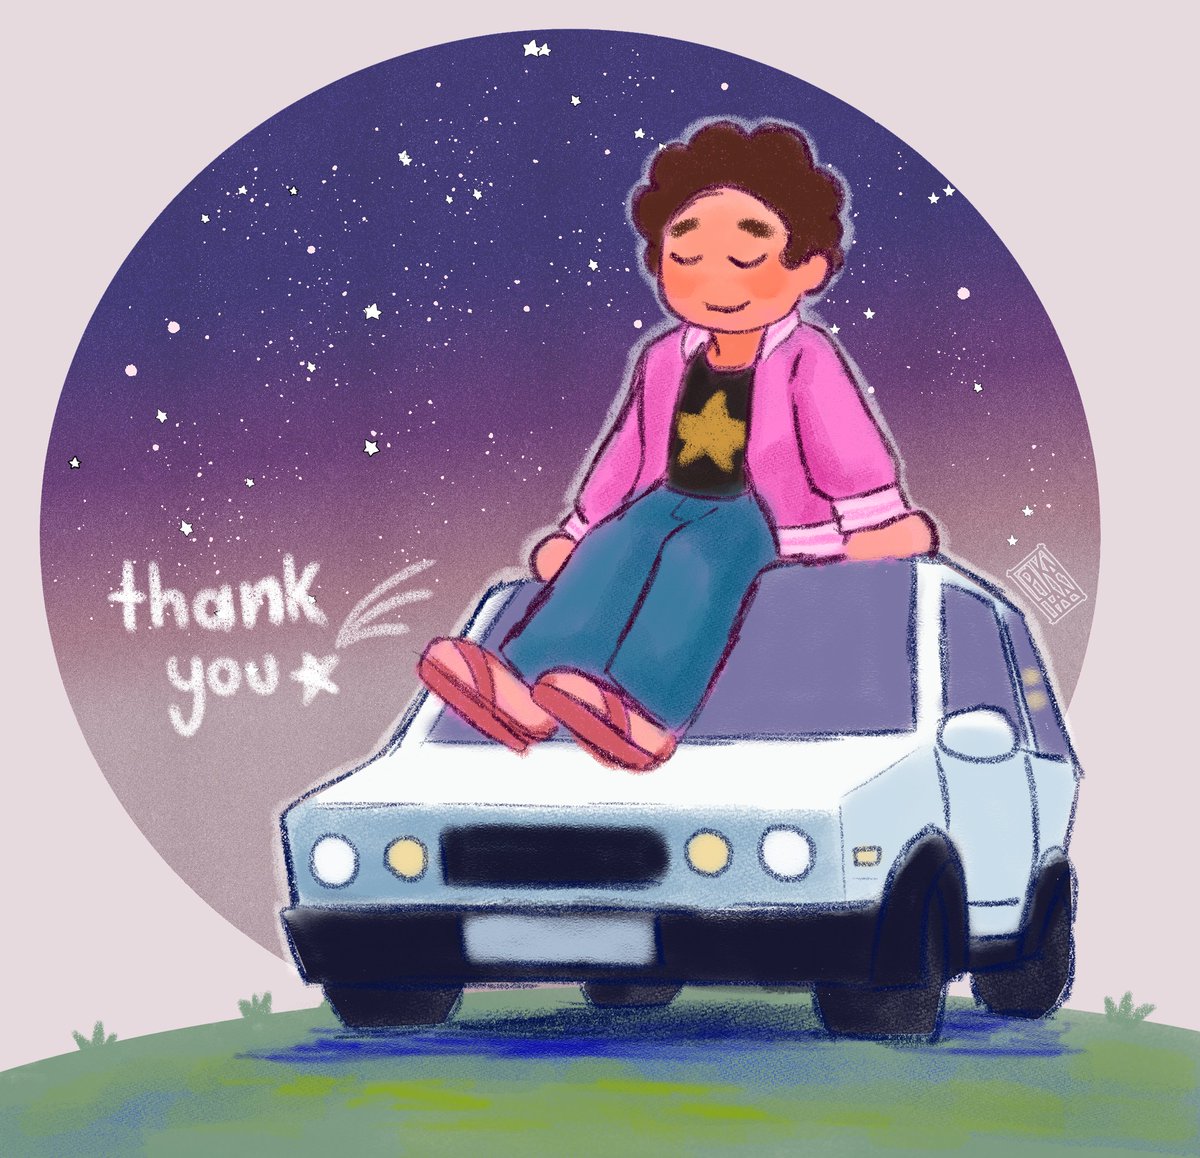 Thanks for everything Universe crew :'0
#StevenUniverse #StevenUniverseFuture #stevenuniversefinale #StevenUniverseEnds #lovelikeyou #beinghuman